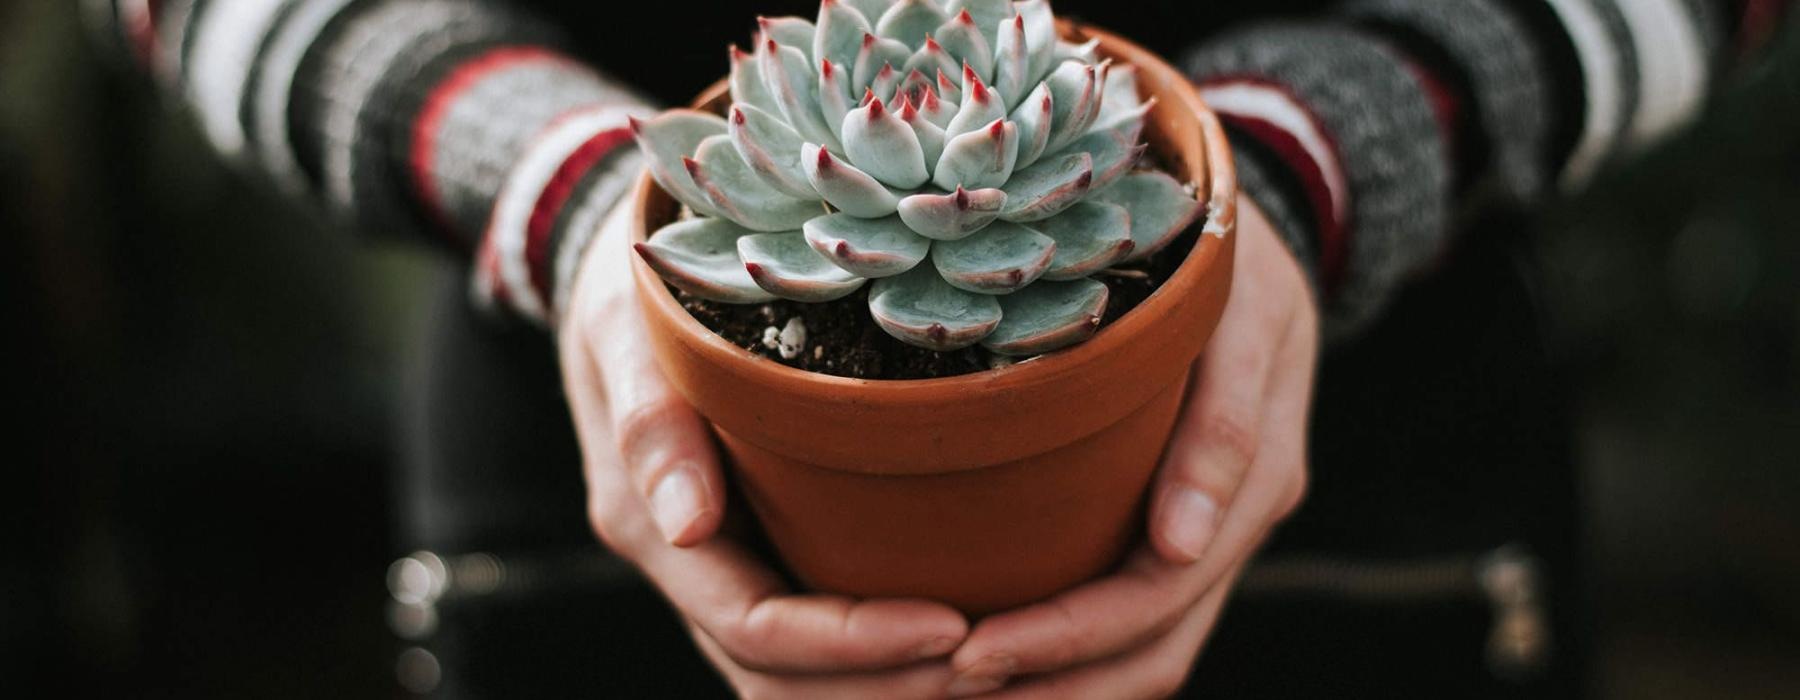 woman holding a potted succulent